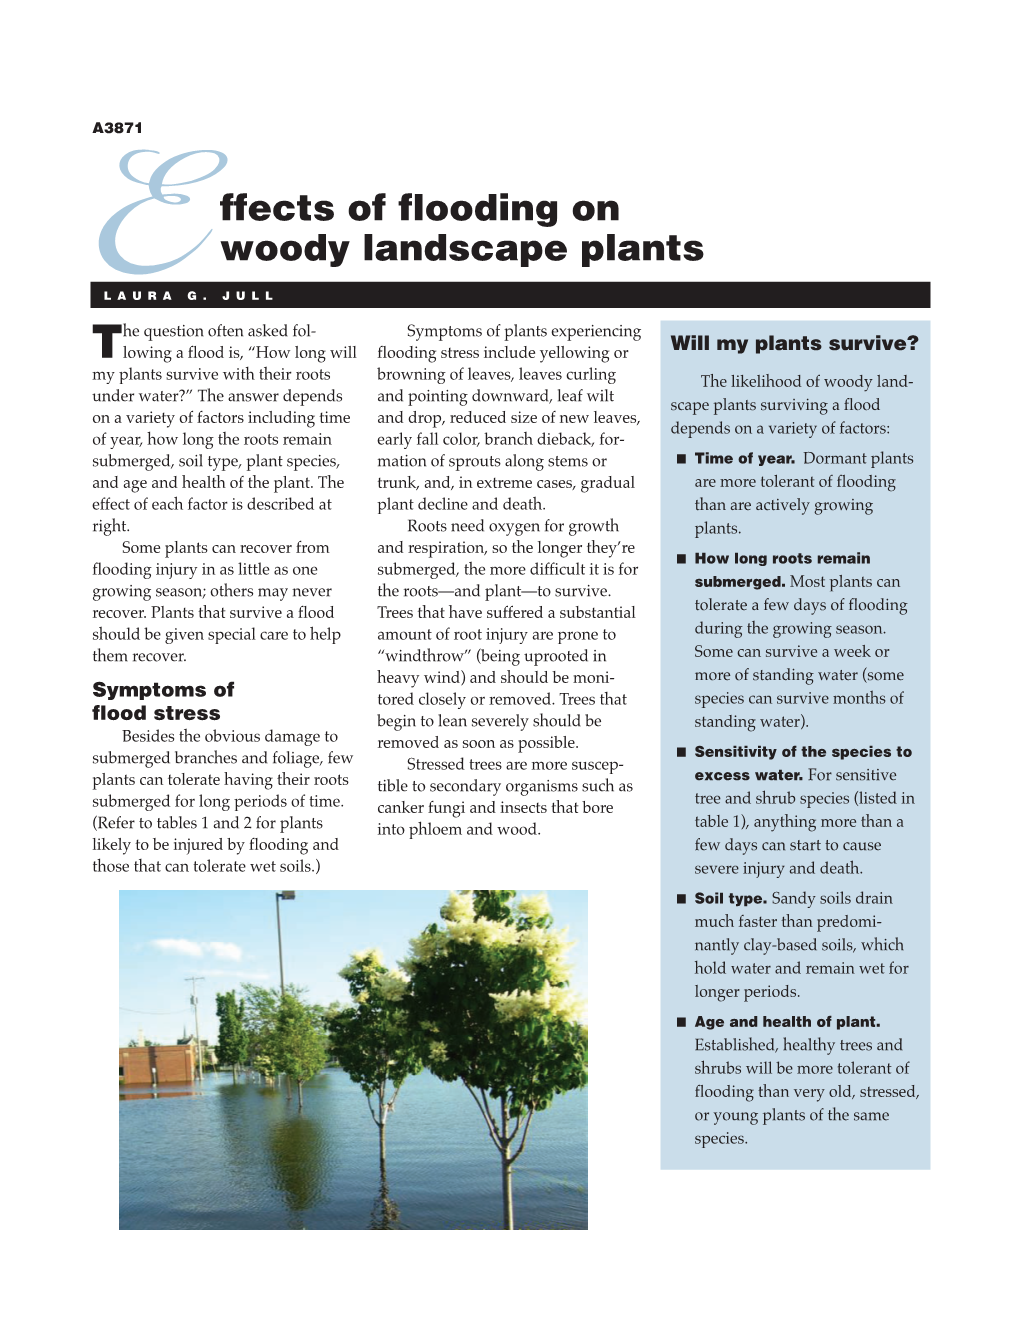 Effects of Flooding on Woody Landscape Plants (A3871)